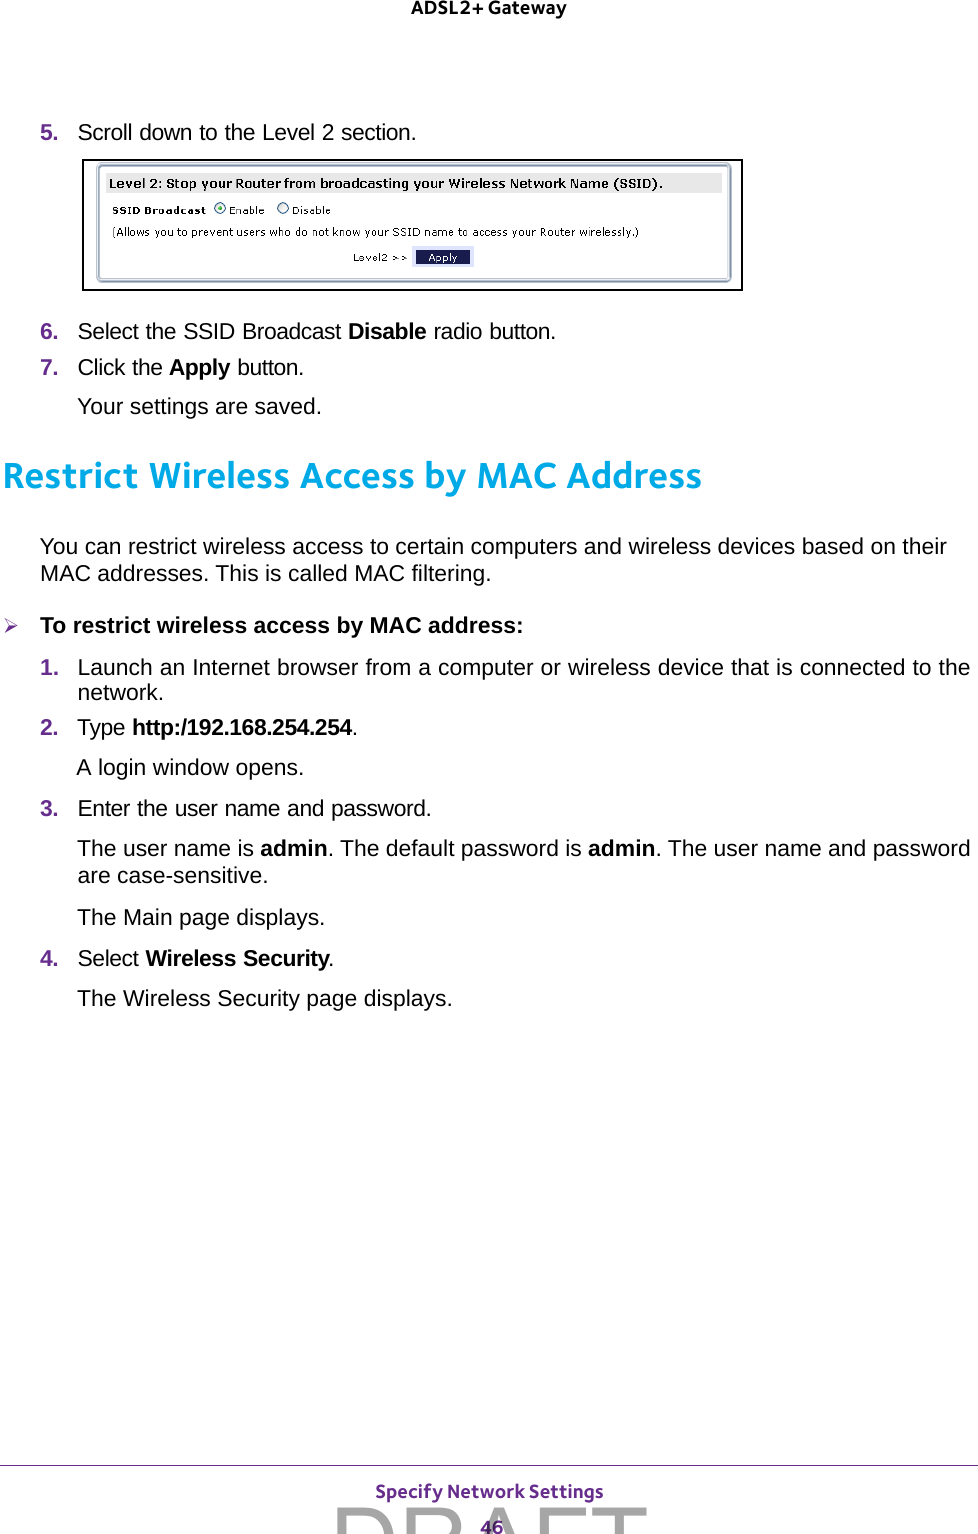 Specify Network Settings 46ADSL2+ Gateway 5.  Scroll down to the Level 2 section.6.  Select the SSID Broadcast Disable radio button.7.  Click the Apply button.Your settings are saved.Restrict Wireless Access by MAC AddressYou can restrict wireless access to certain computers and wireless devices based on their MAC addresses. This is called MAC filtering.To restrict wireless access by MAC address:1.  Launch an Internet browser from a computer or wireless device that is connected to the network.2.  Type http:/192.168.254.254.A login window opens.3.  Enter the user name and password.The user name is admin. The default password is admin. The user name and password are case-sensitive.The Main page displays.4.  Select Wireless Security.The Wireless Security page displays.DRAFT